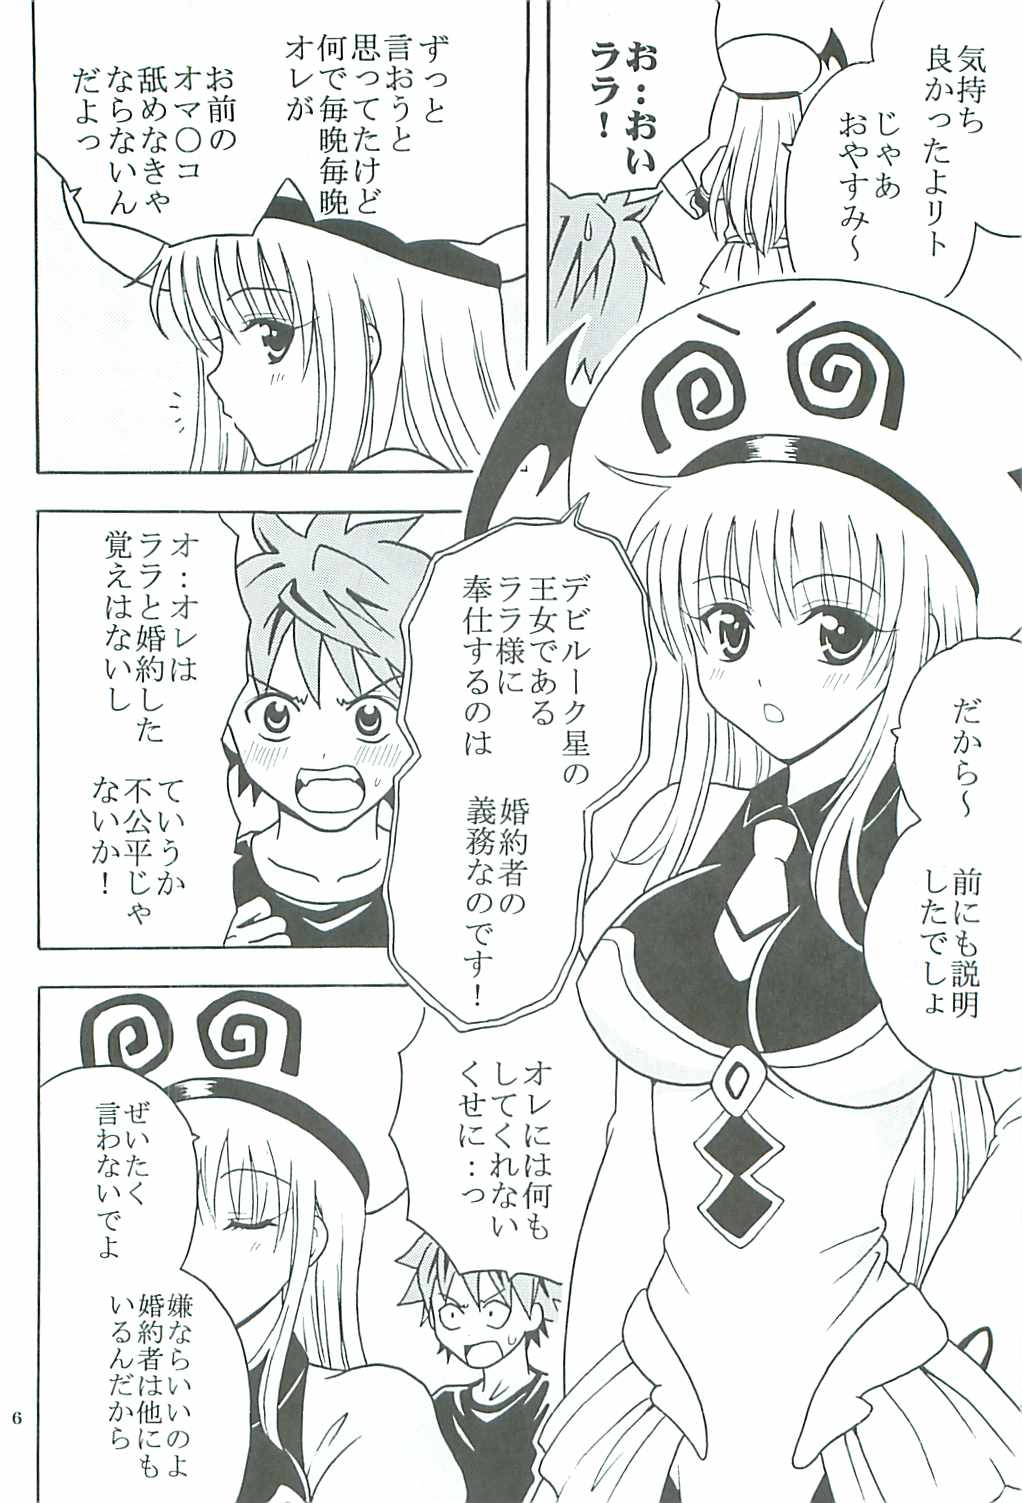 [St.Rio] ToLOVE Ryu 2 (To Love Ru) page 7 full